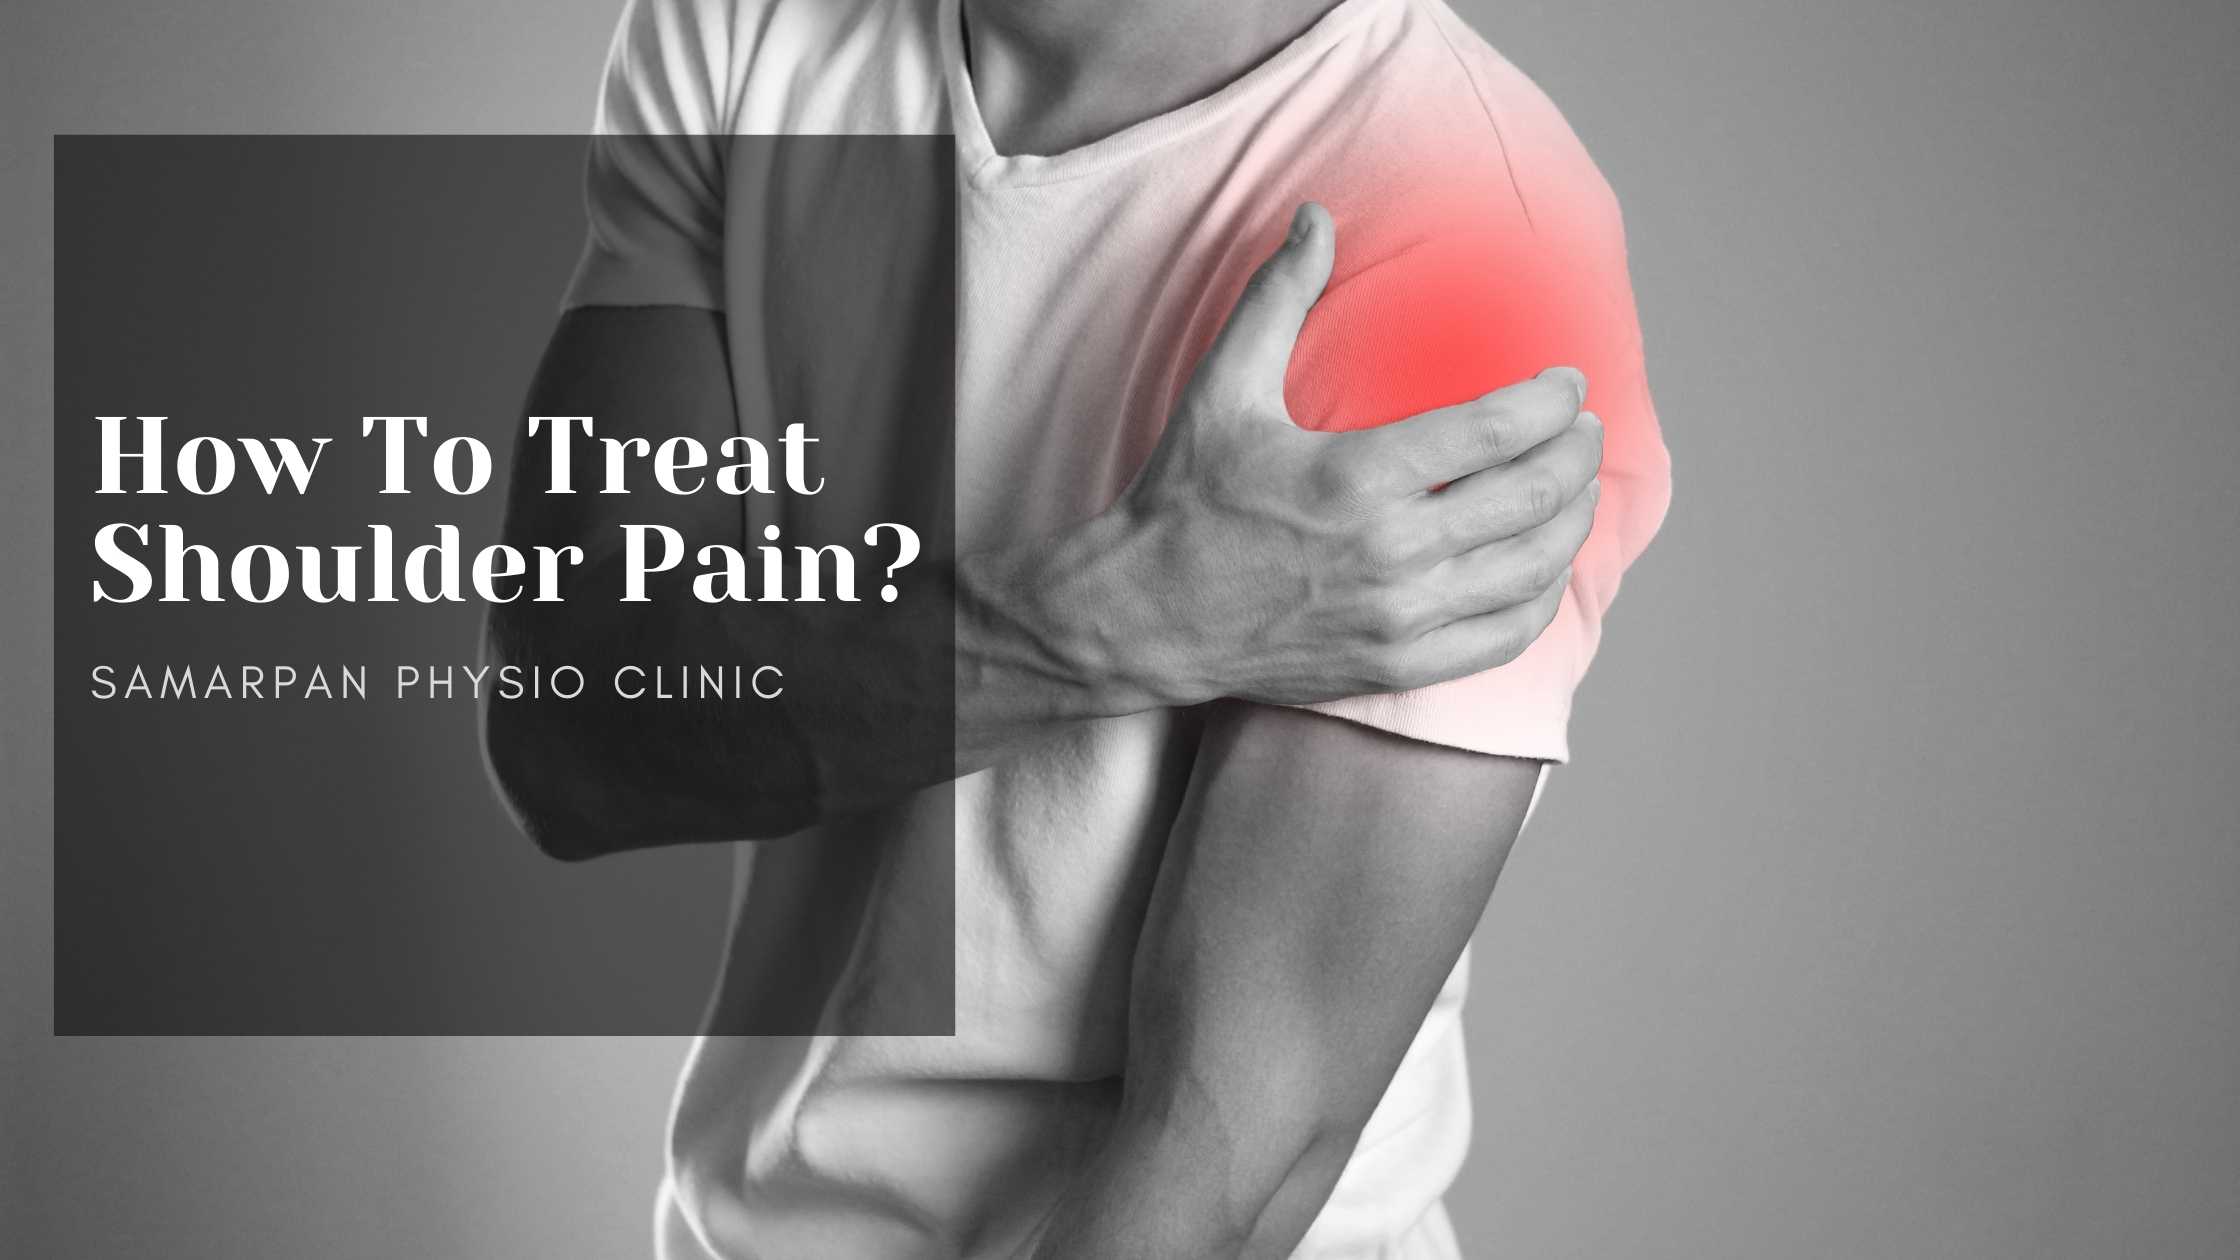 How to Treat Shoulder Pain